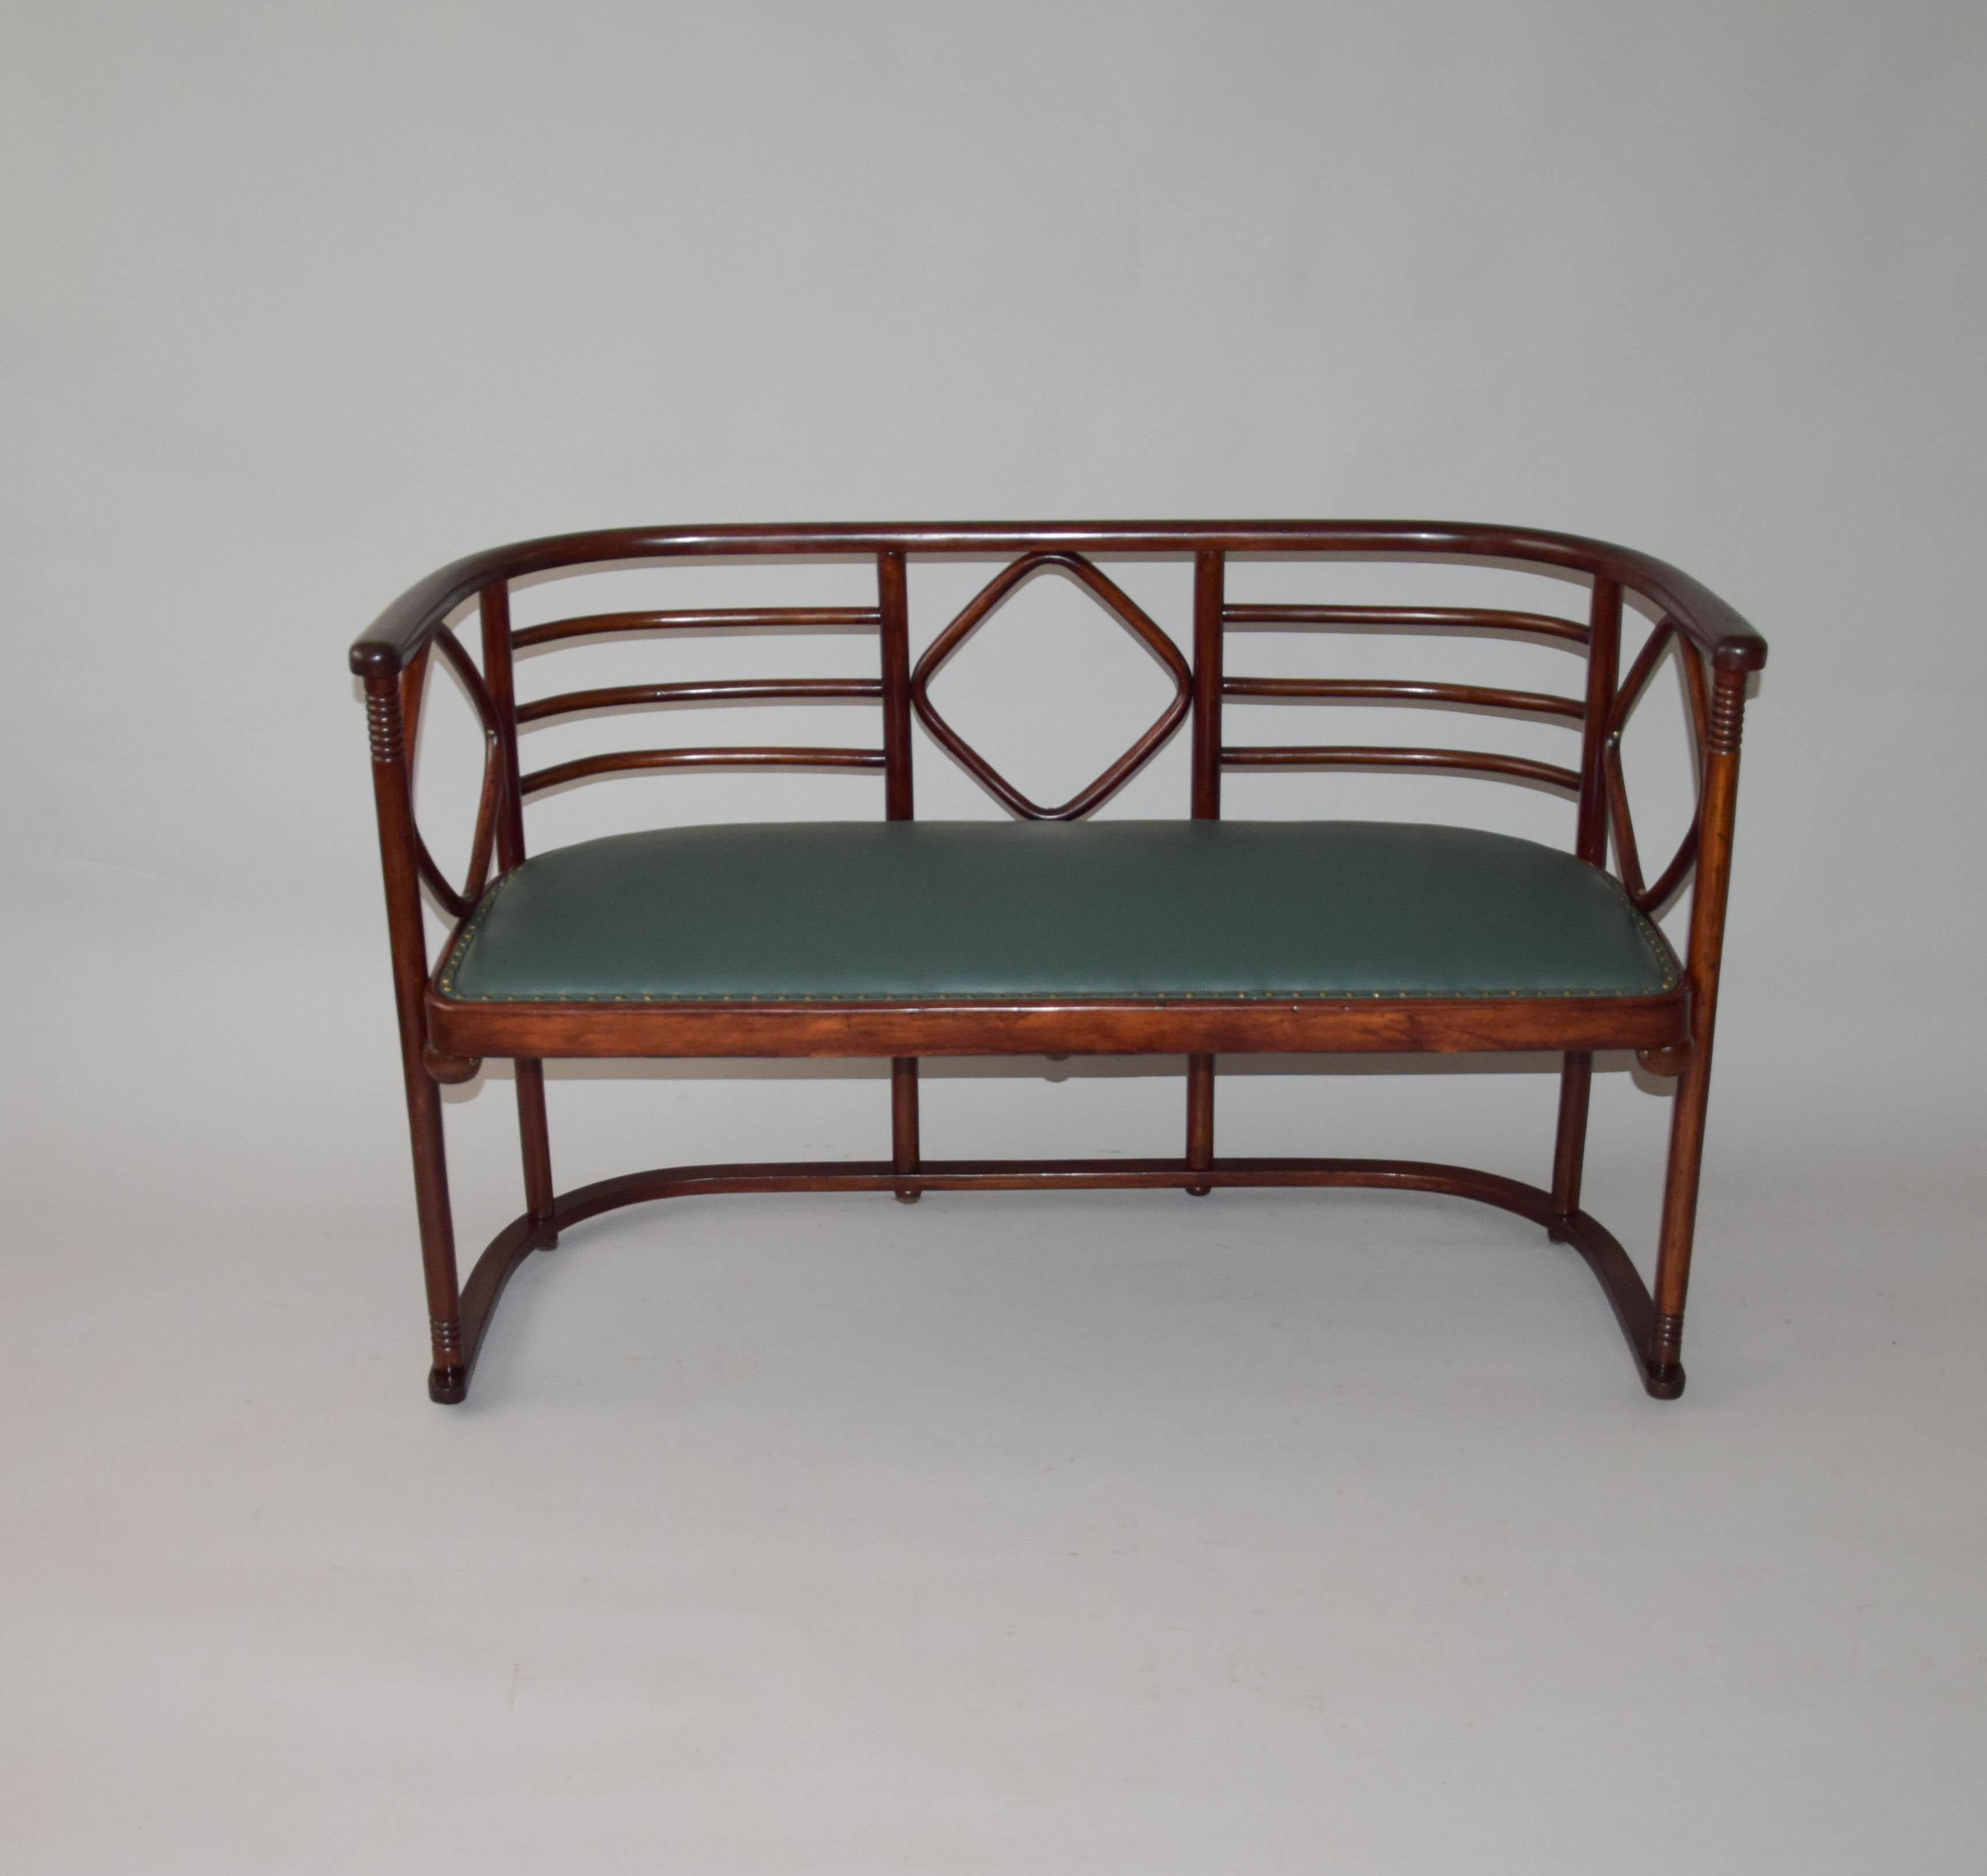 Art Nouveau Thonet sofa and two armchairs, J/J Kohn, upholstered in genuine leather, designed in 1905 by architect Josef Hoffmann for the Fledermaus cabaret, Austria, completely restored, newly upholstered in genuine leather, quality cowhide Prince